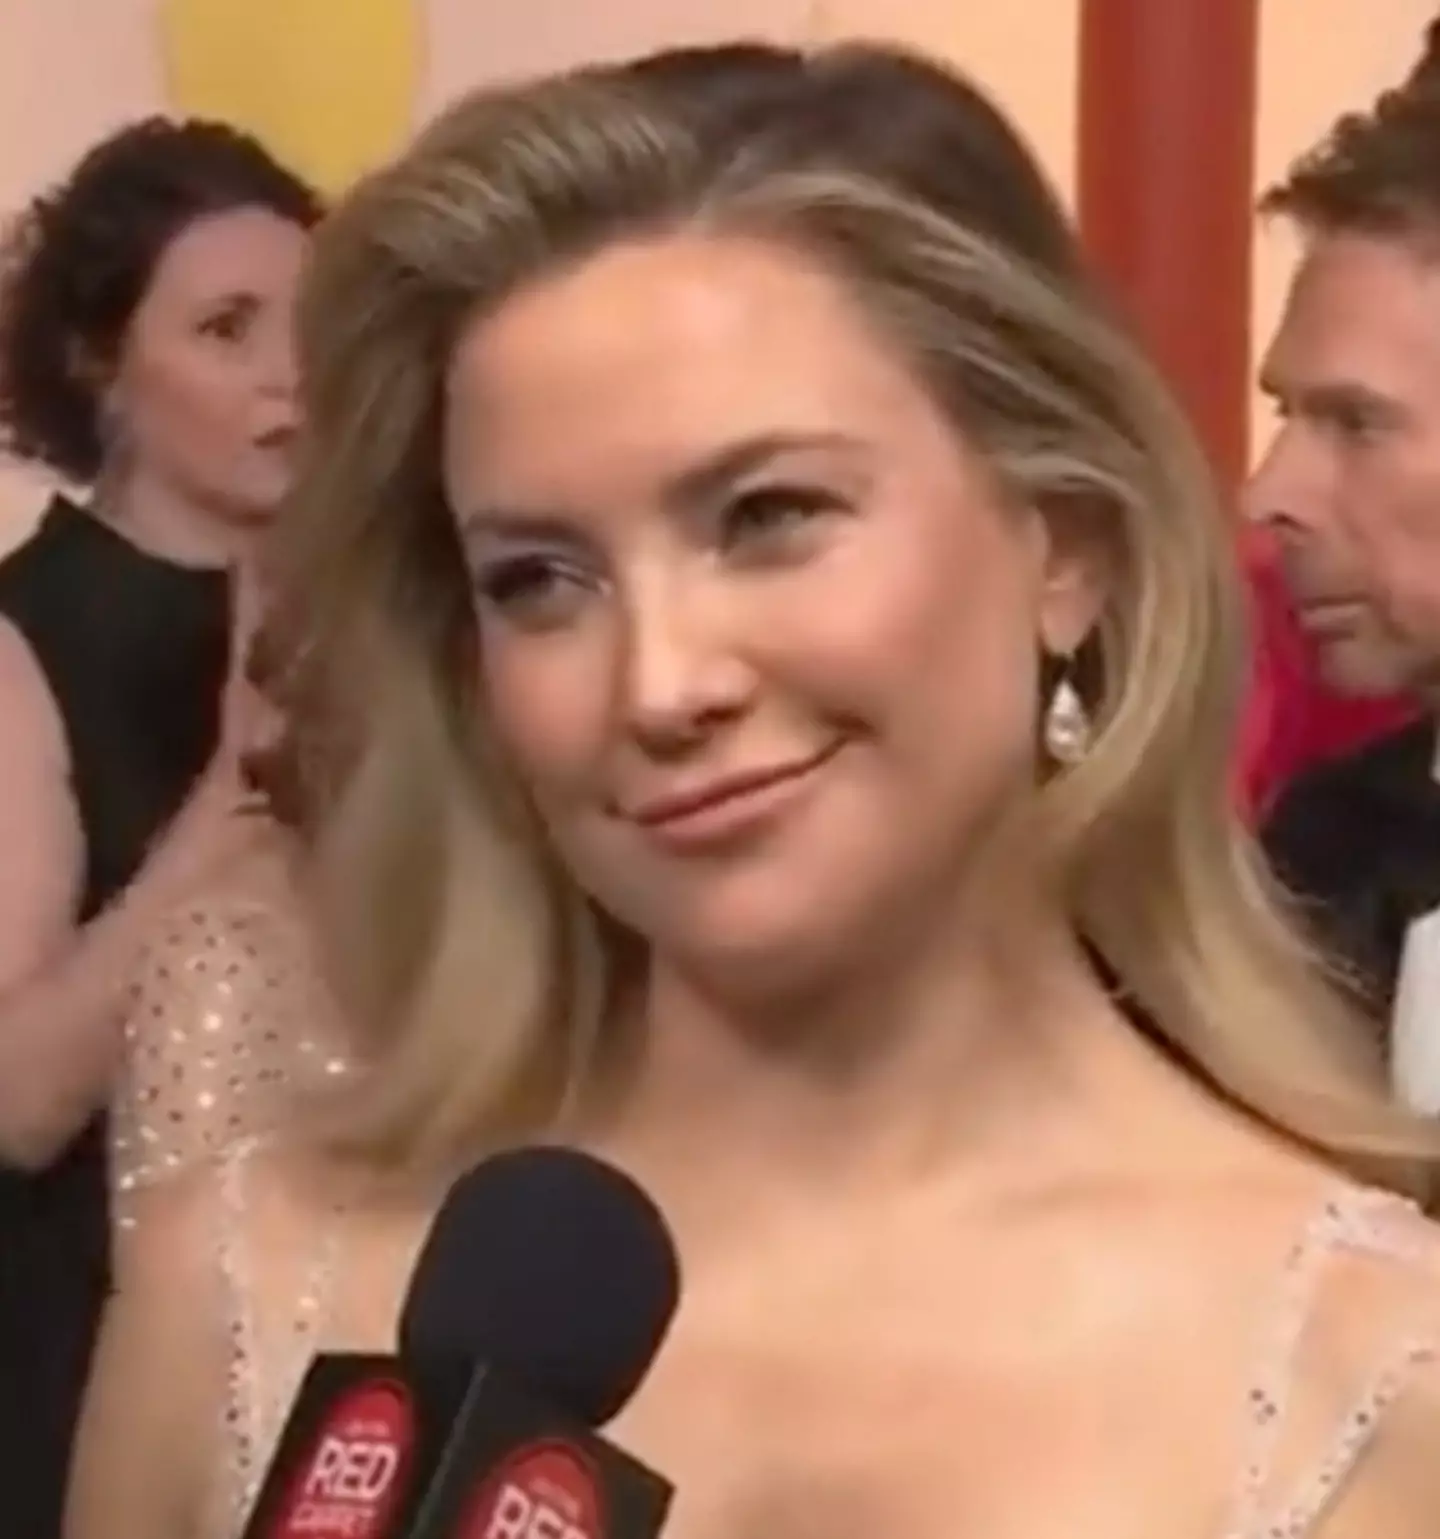 Kate Hudson had to correct the reporter.